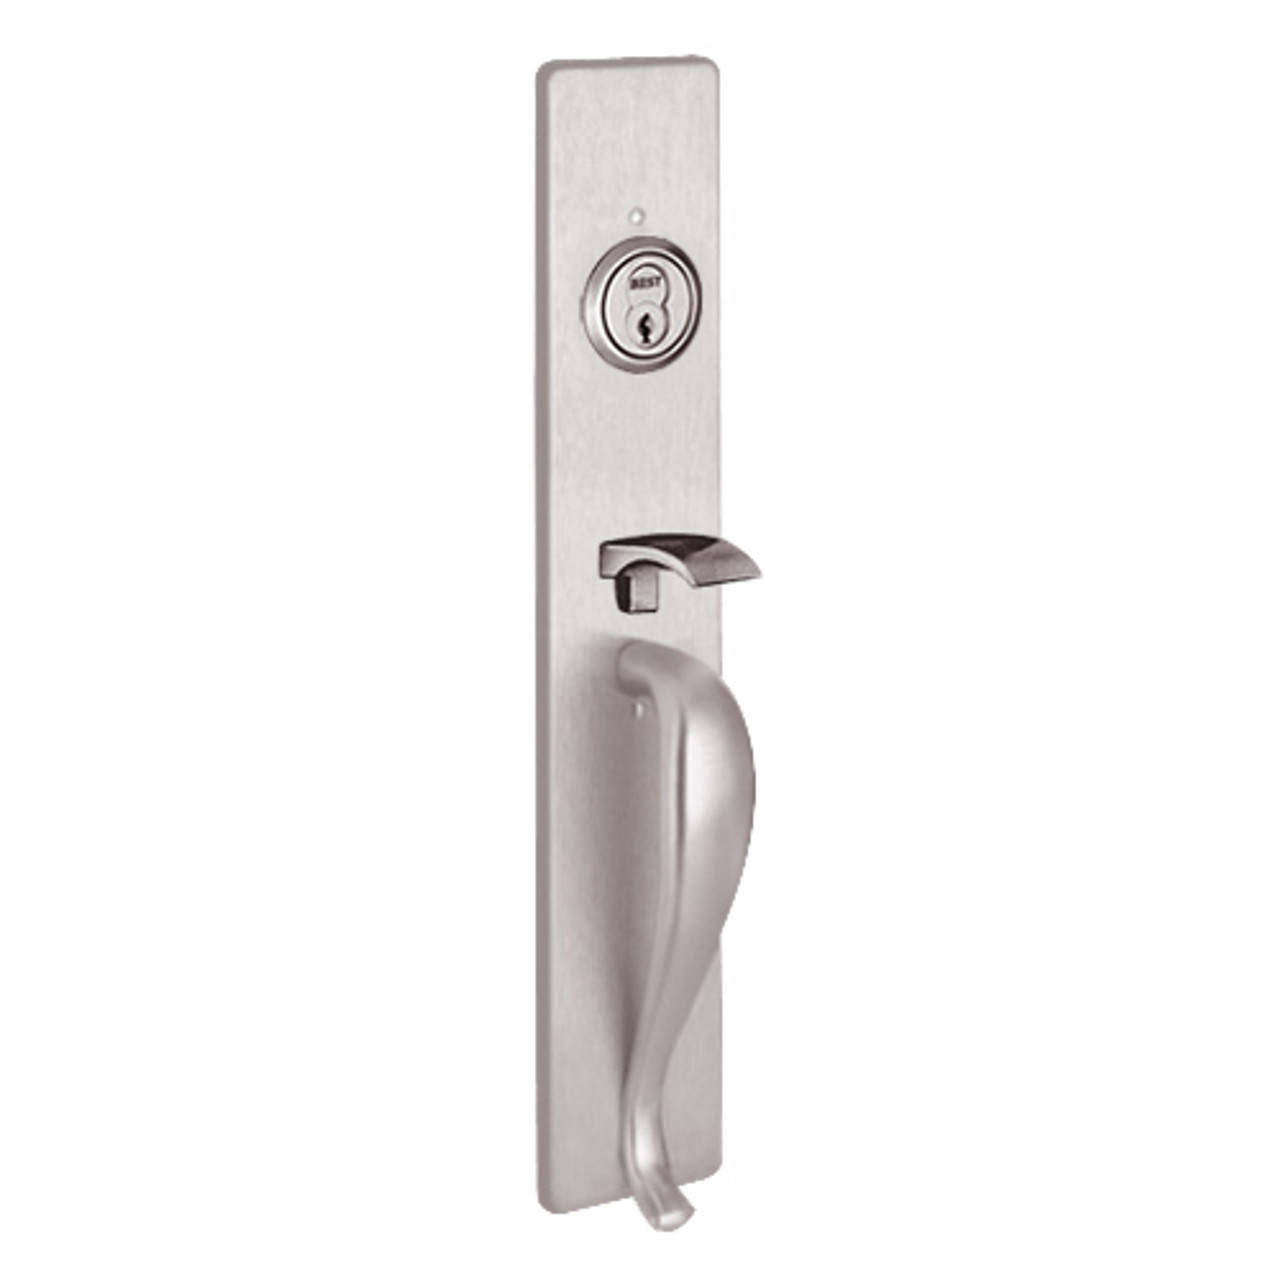 RM1705B-630 PHI Key Controls Thumb Piece Retrofit Trim with B Design Pull for Apex and Olympian Series Exit Device in Satin Stainless Steel Finish